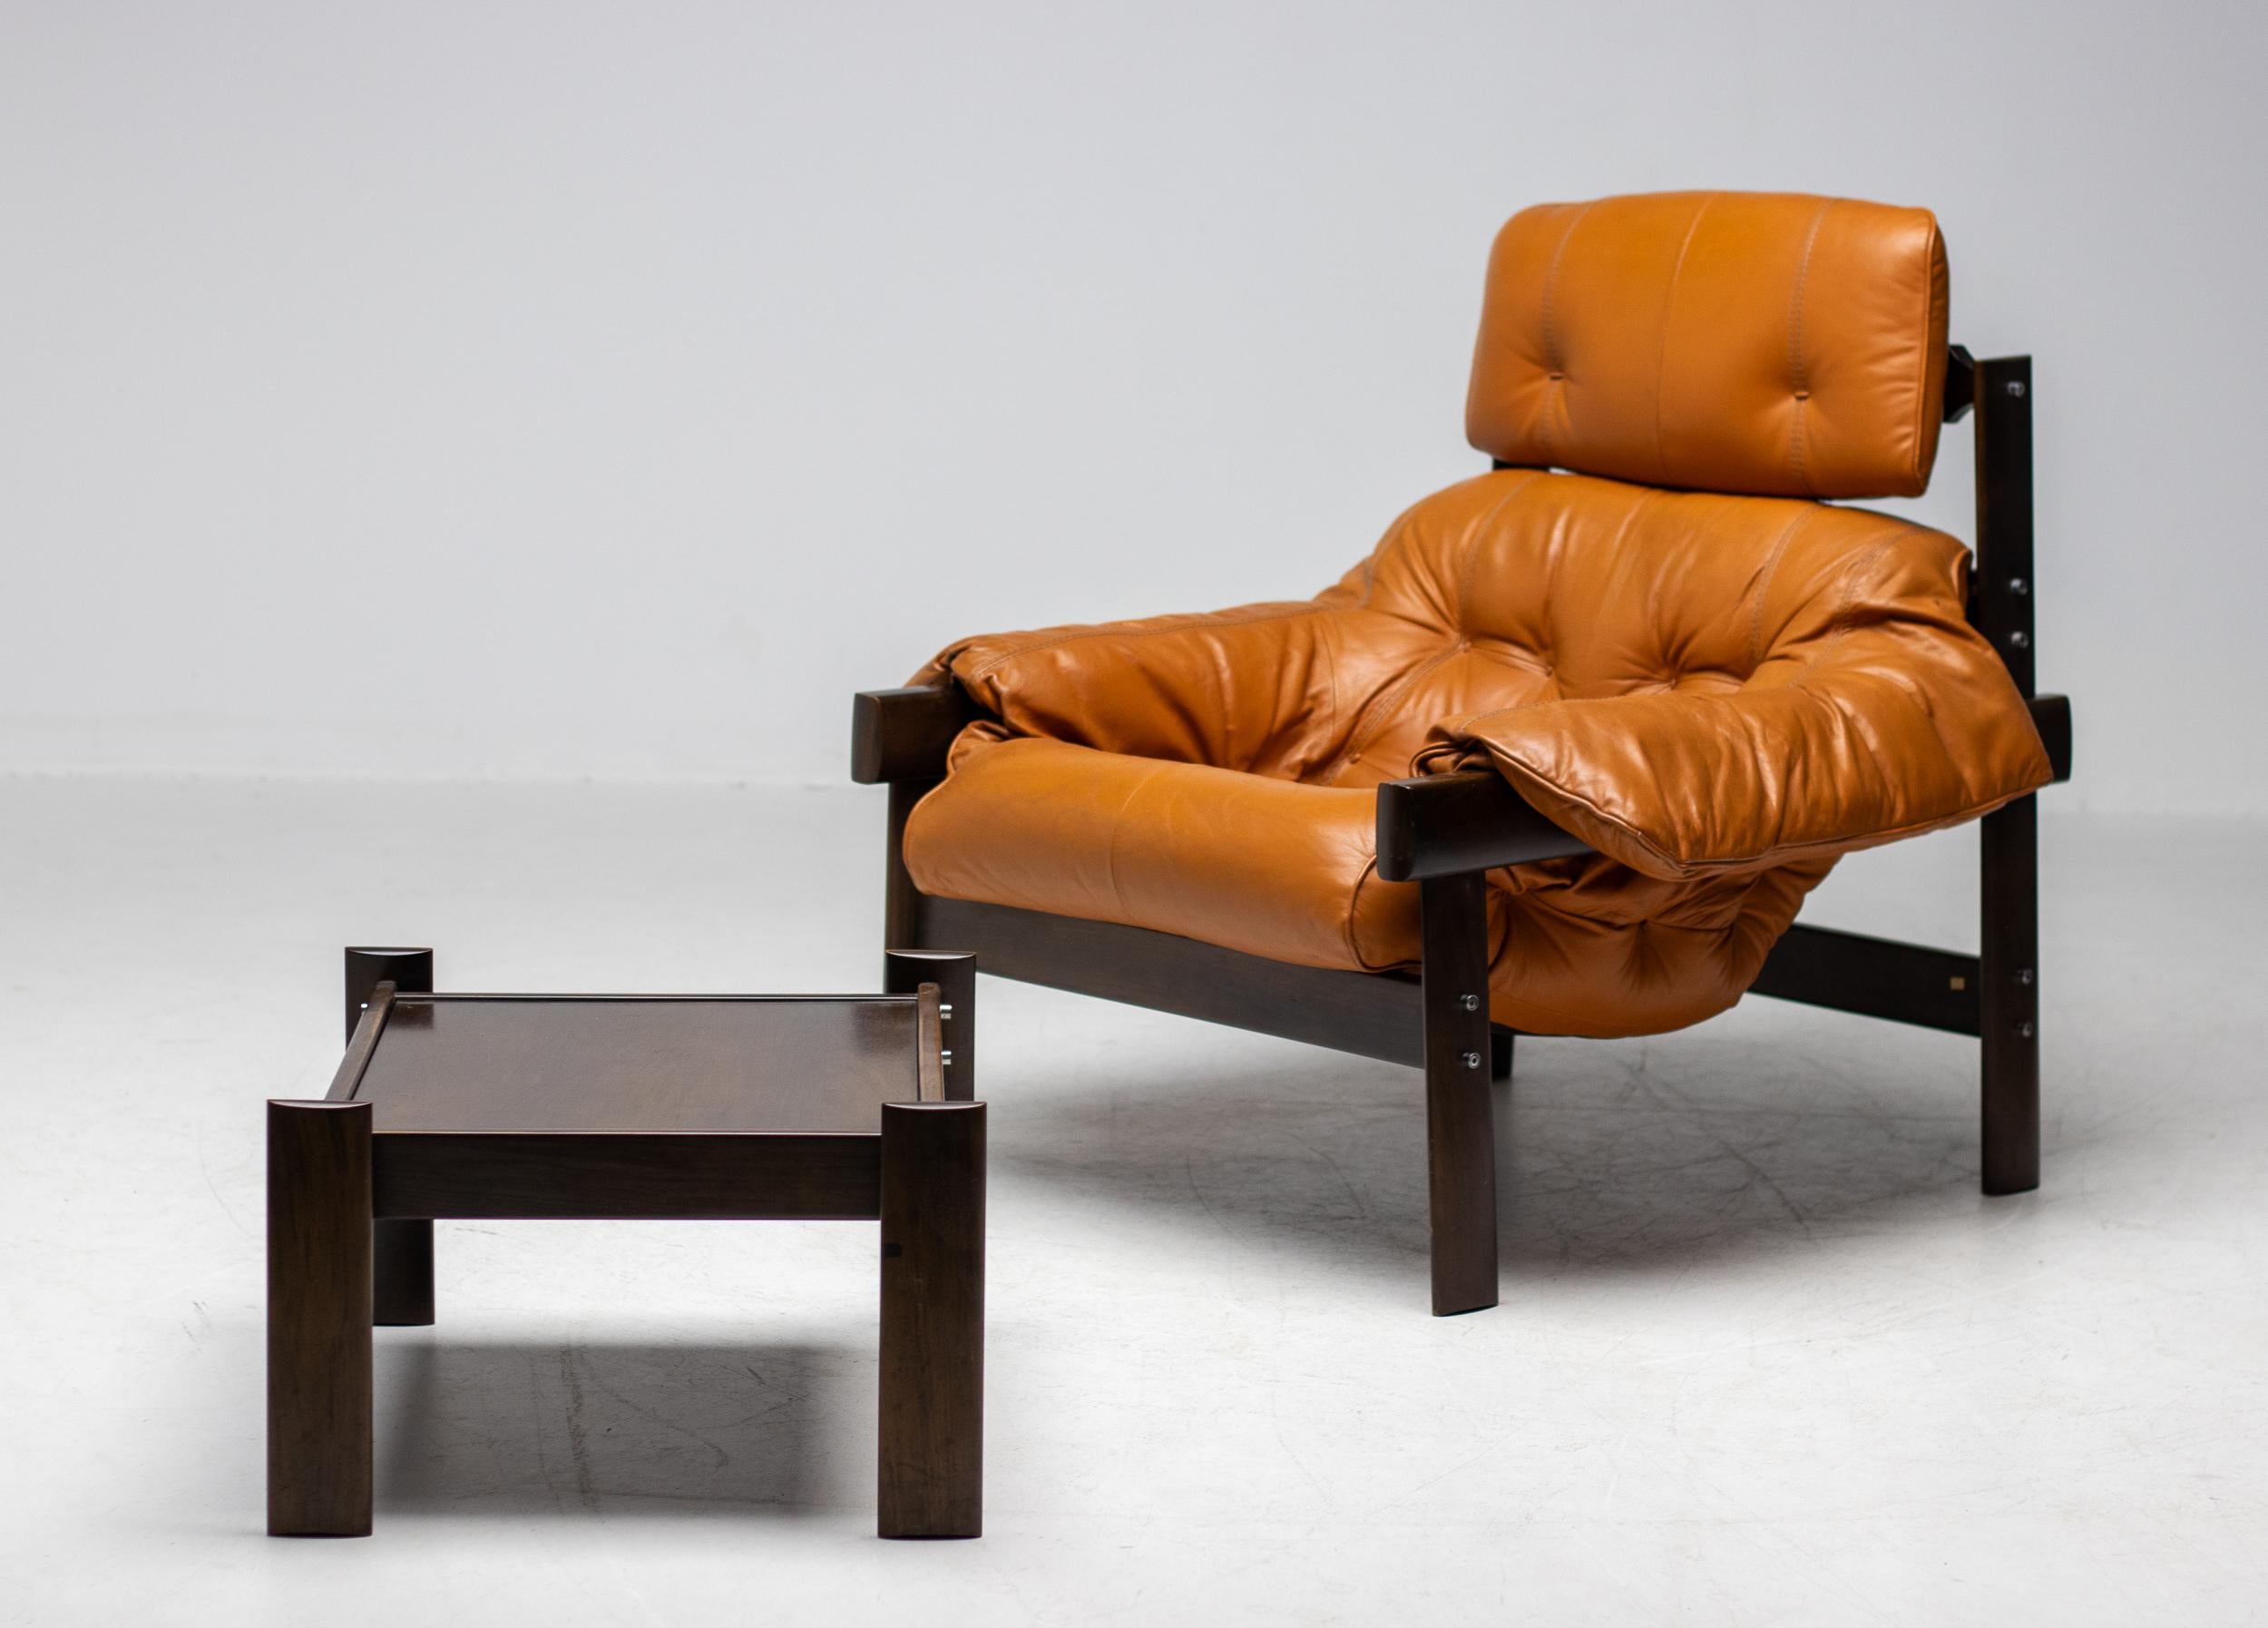 Percival Lafer MP-43 Lounge Chair Produced by Lafer MP in Brazil 2